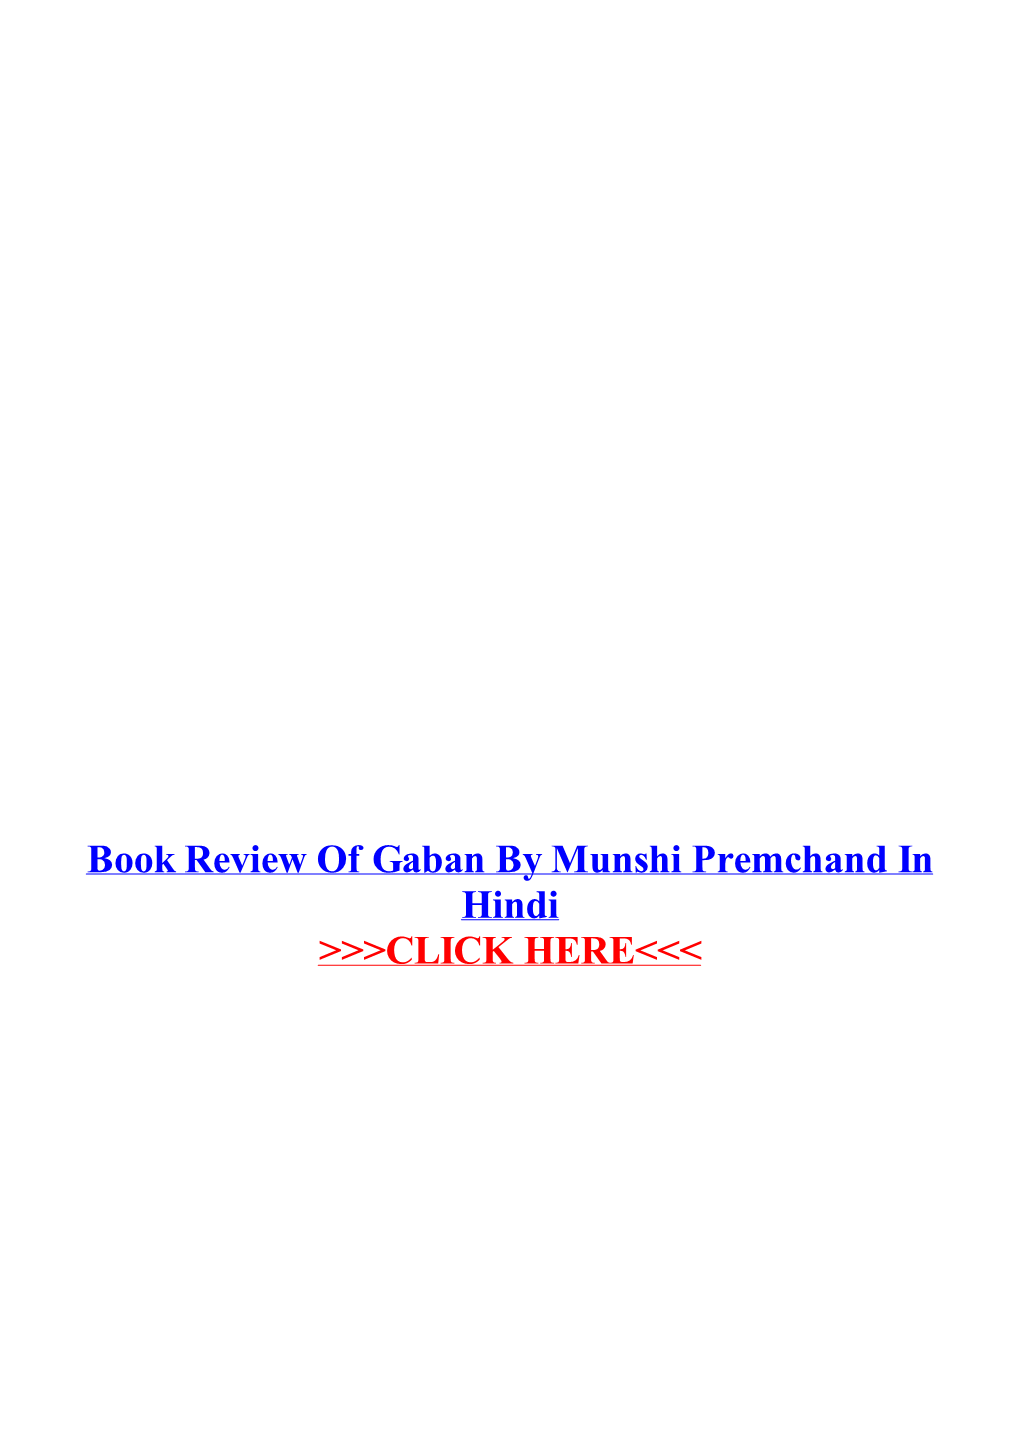 Book Review of Gaban by Munshi Premchand in Hindi